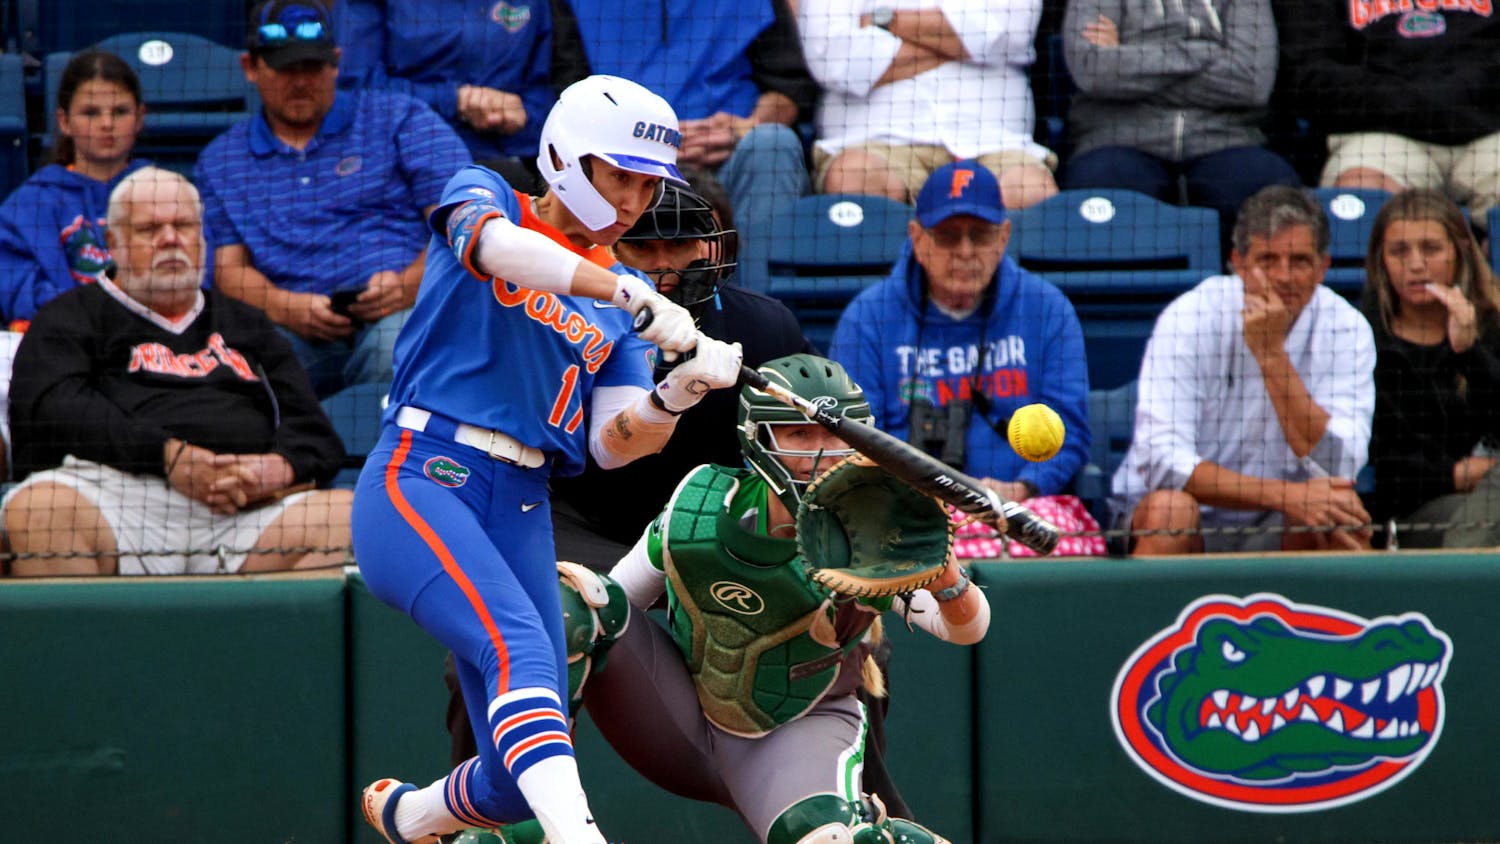 Florida shortstop Skylar Wallace hits a two-run home run in the Gators' 8-0 mercy-rule victory over the Stetson Hatters Wednesday, March 29, 2023.